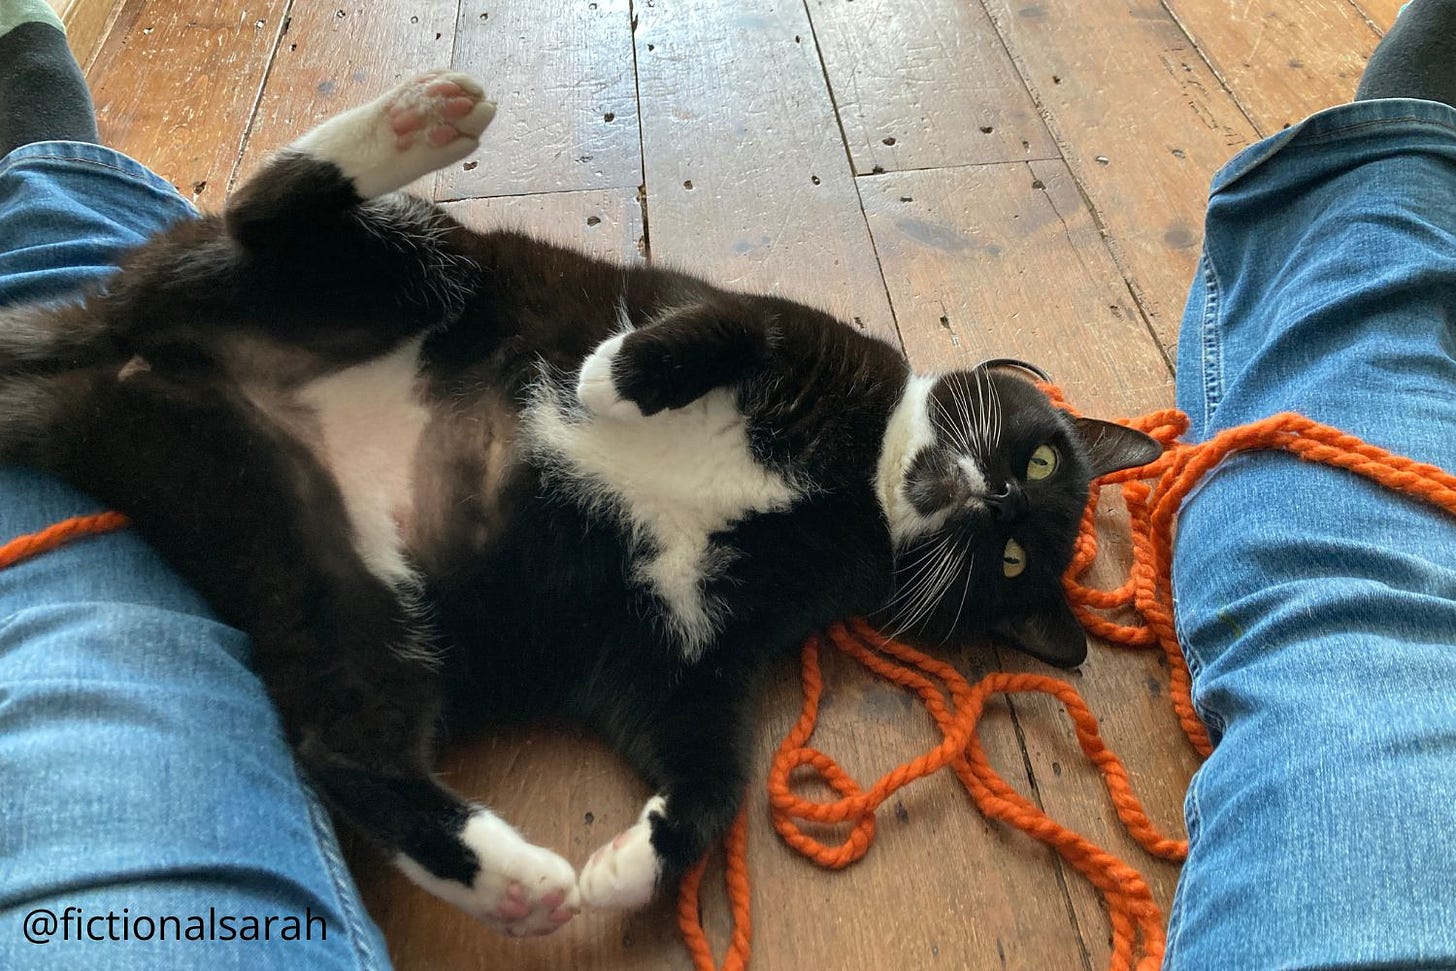 Willow the derpy black and white cat flailing about on her back and ruining my macrame project while her floofy paws flap about in the air